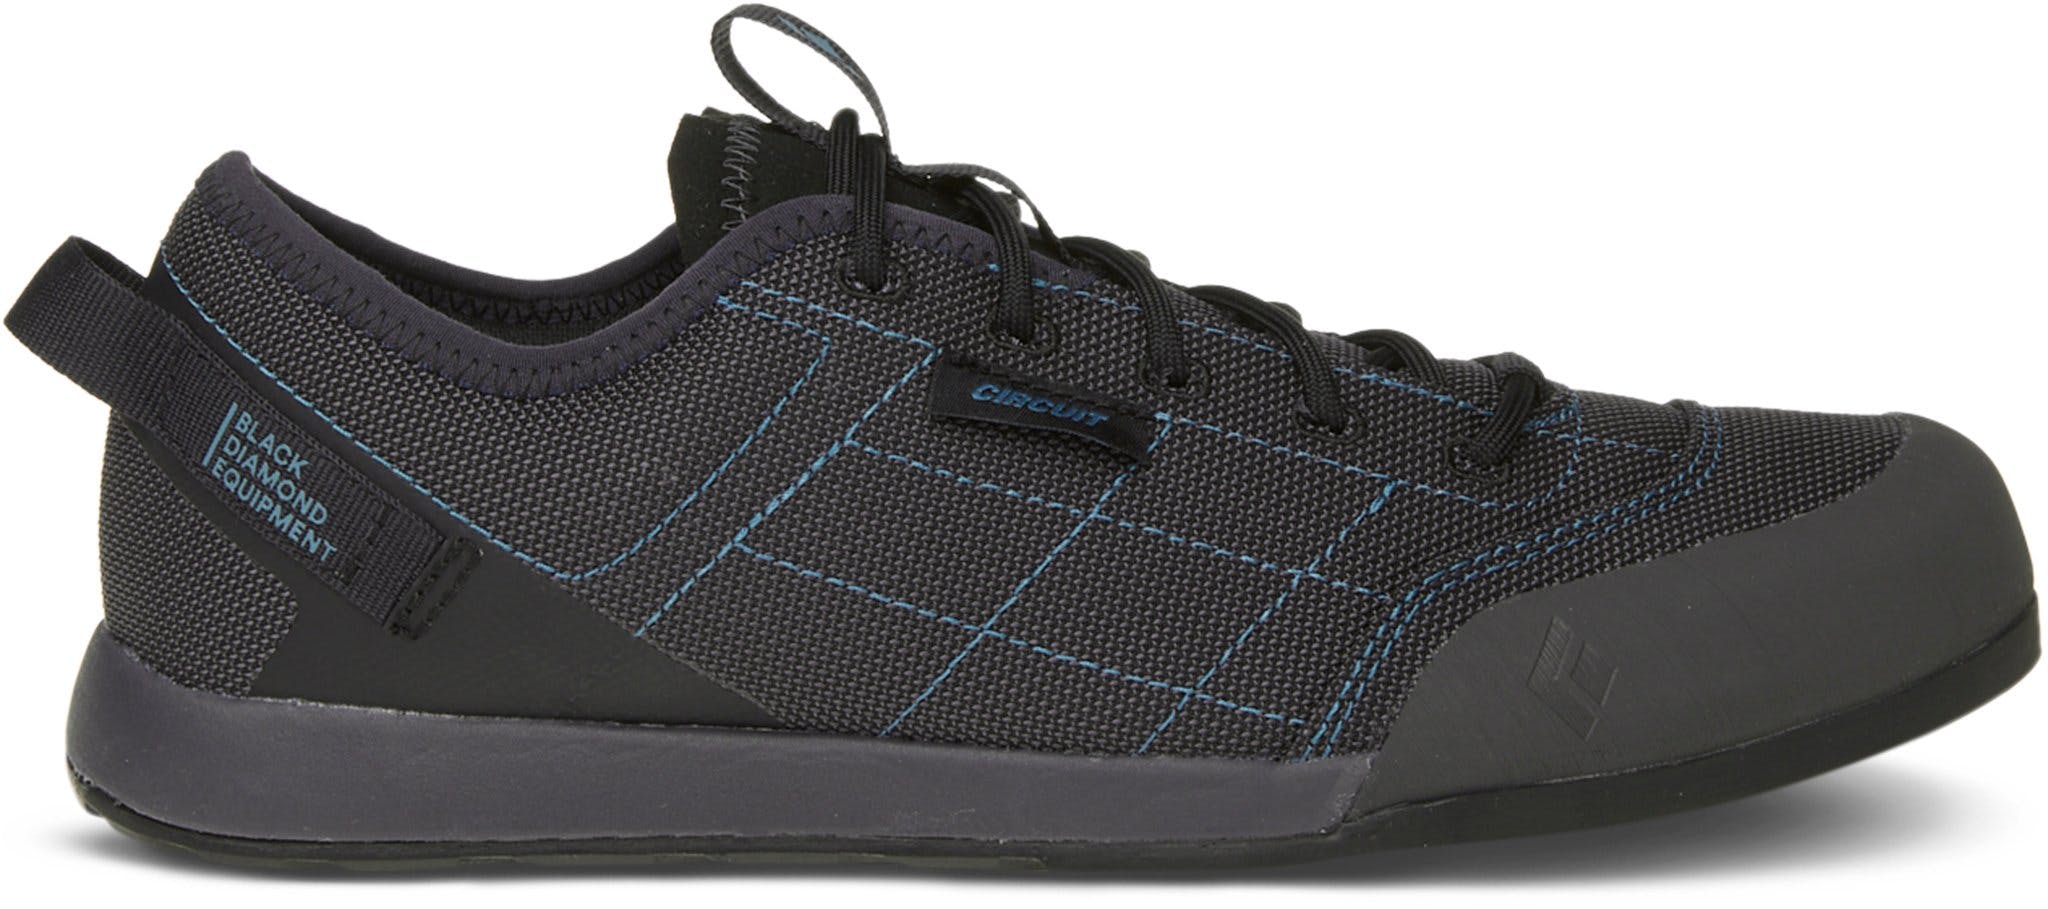 Product image for Circuit 2 Shoe - Men's